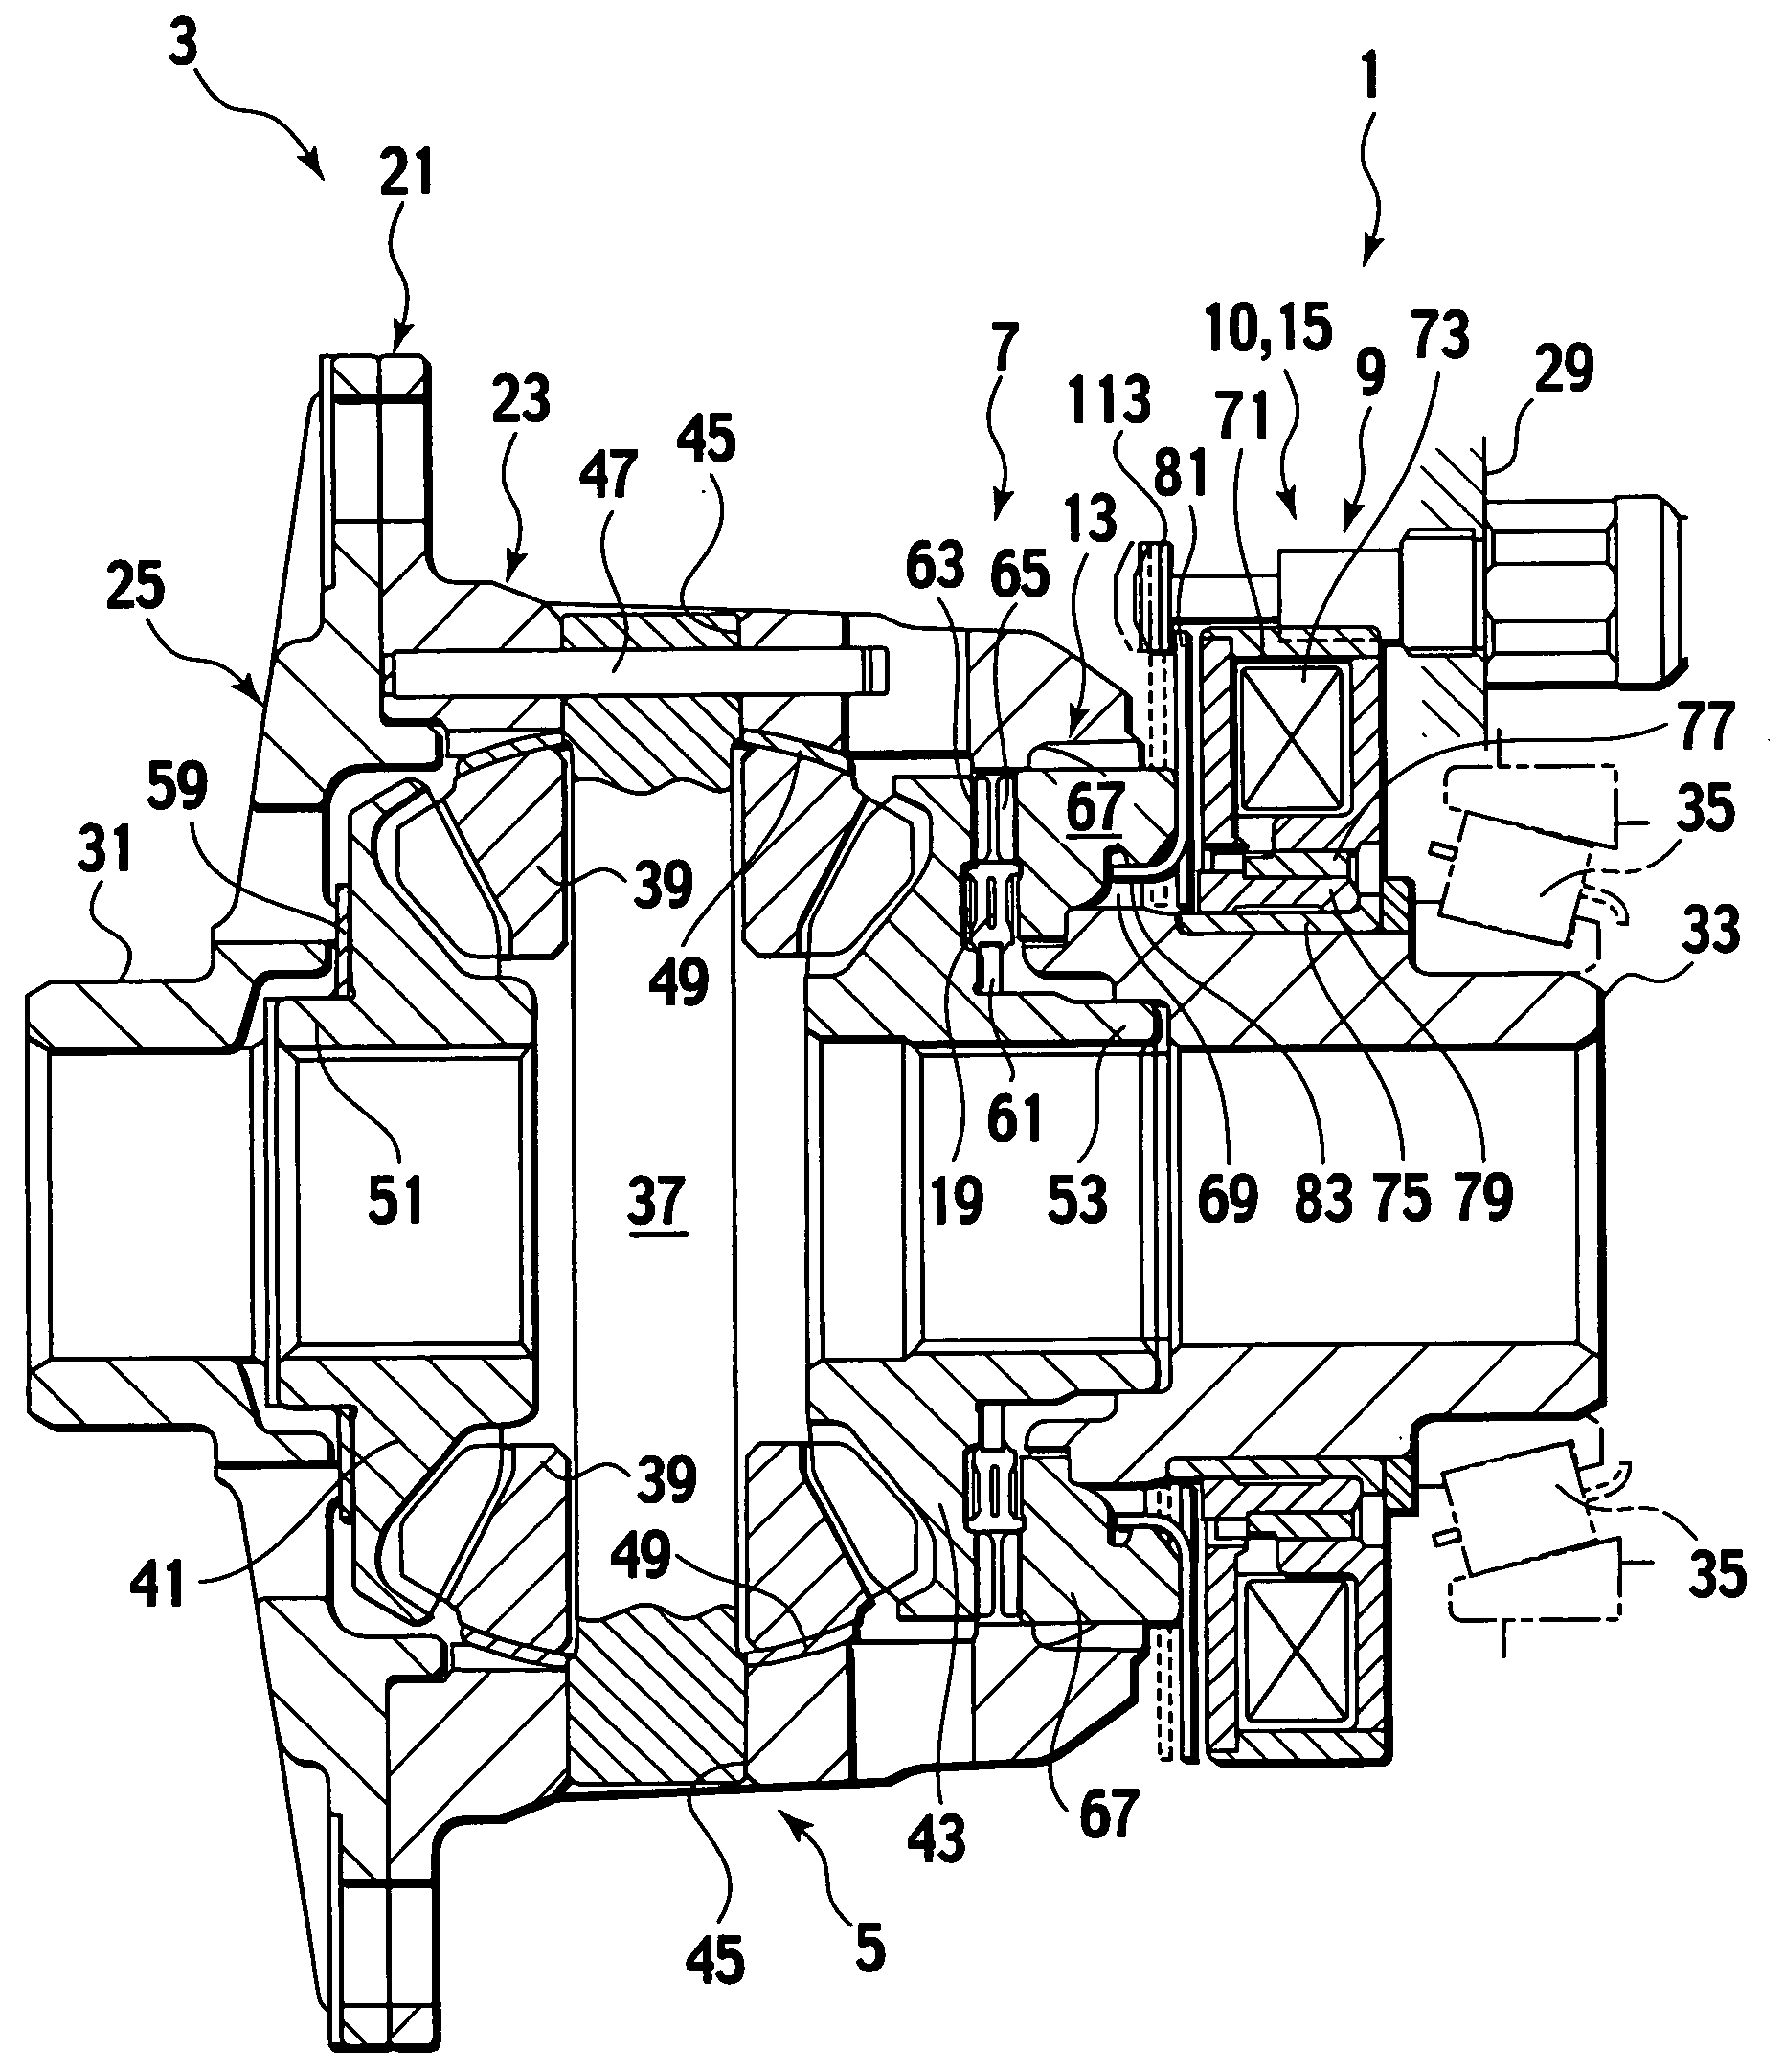 Electromagnetic actuator, and electromagnetic clutch and differential using the same